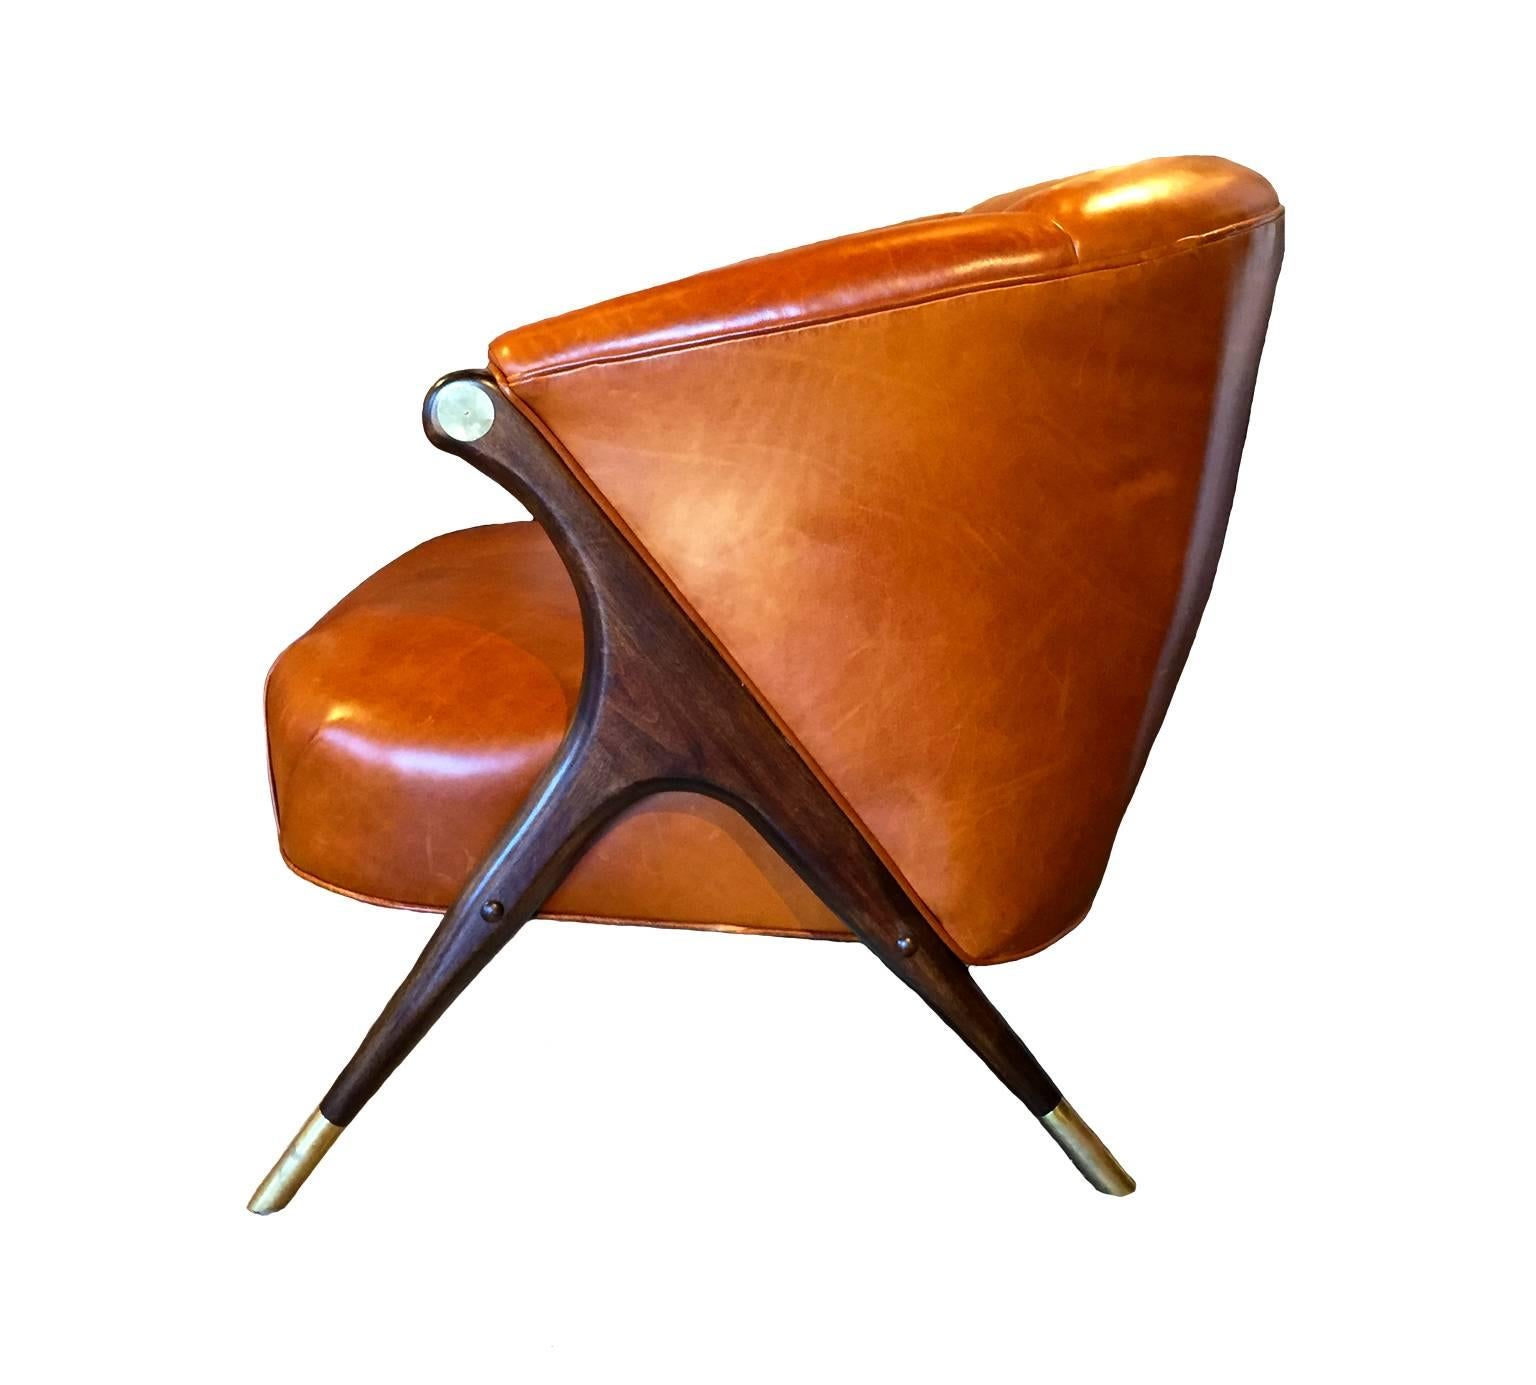 A pair of modern lounge chairs created by the Karpen Company of California. Strong wooden legs with brass accents compliment the channeled cognac leather. 